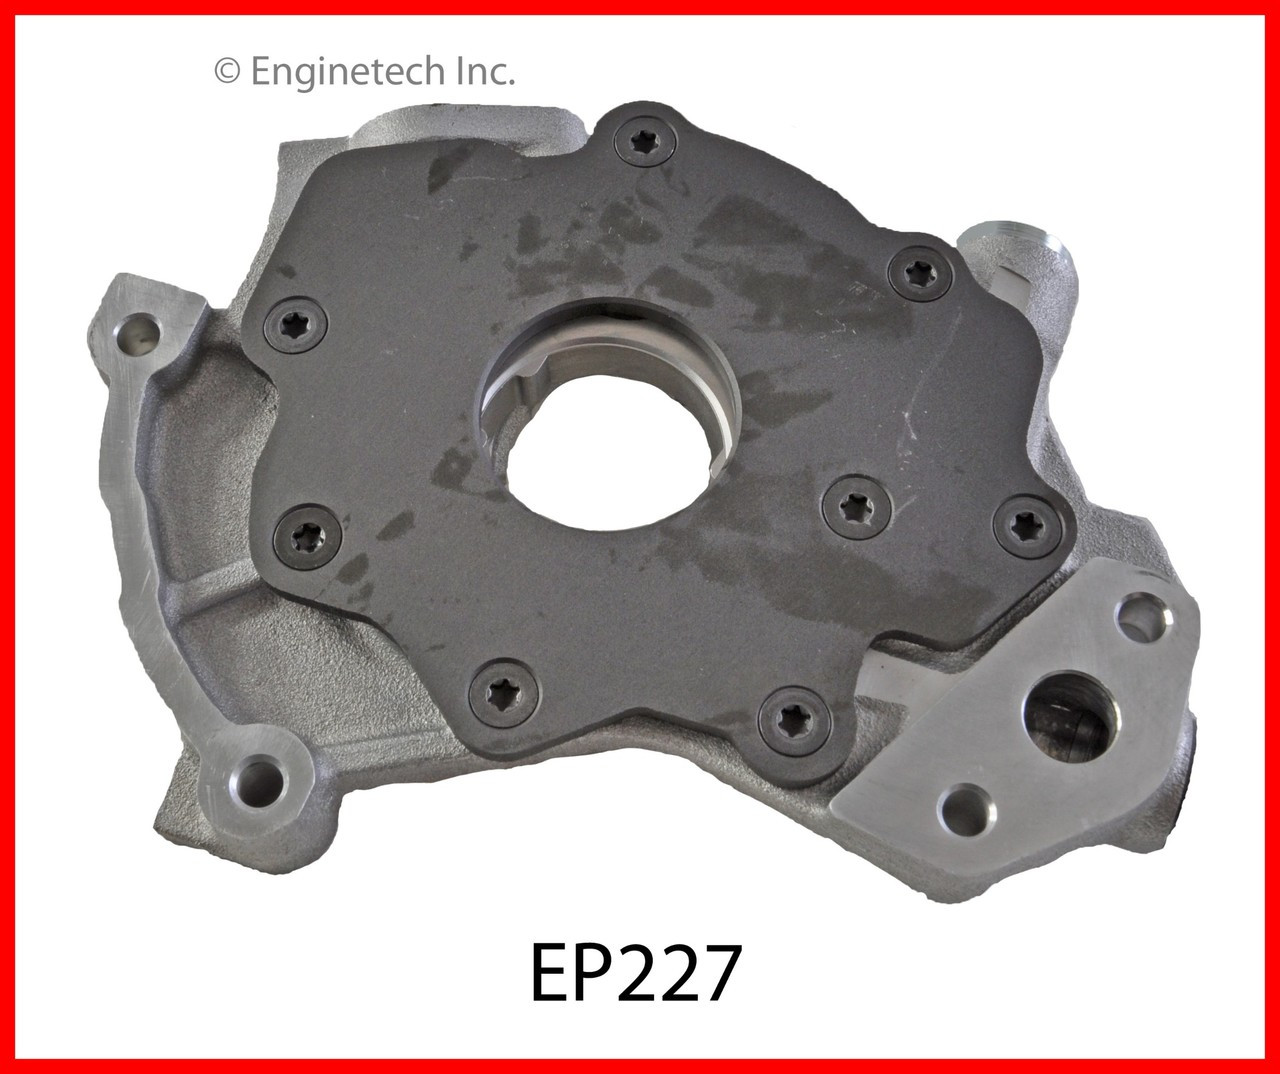 Oil Pump - 1999 Ford Mustang 4.6L (EP227.C23)